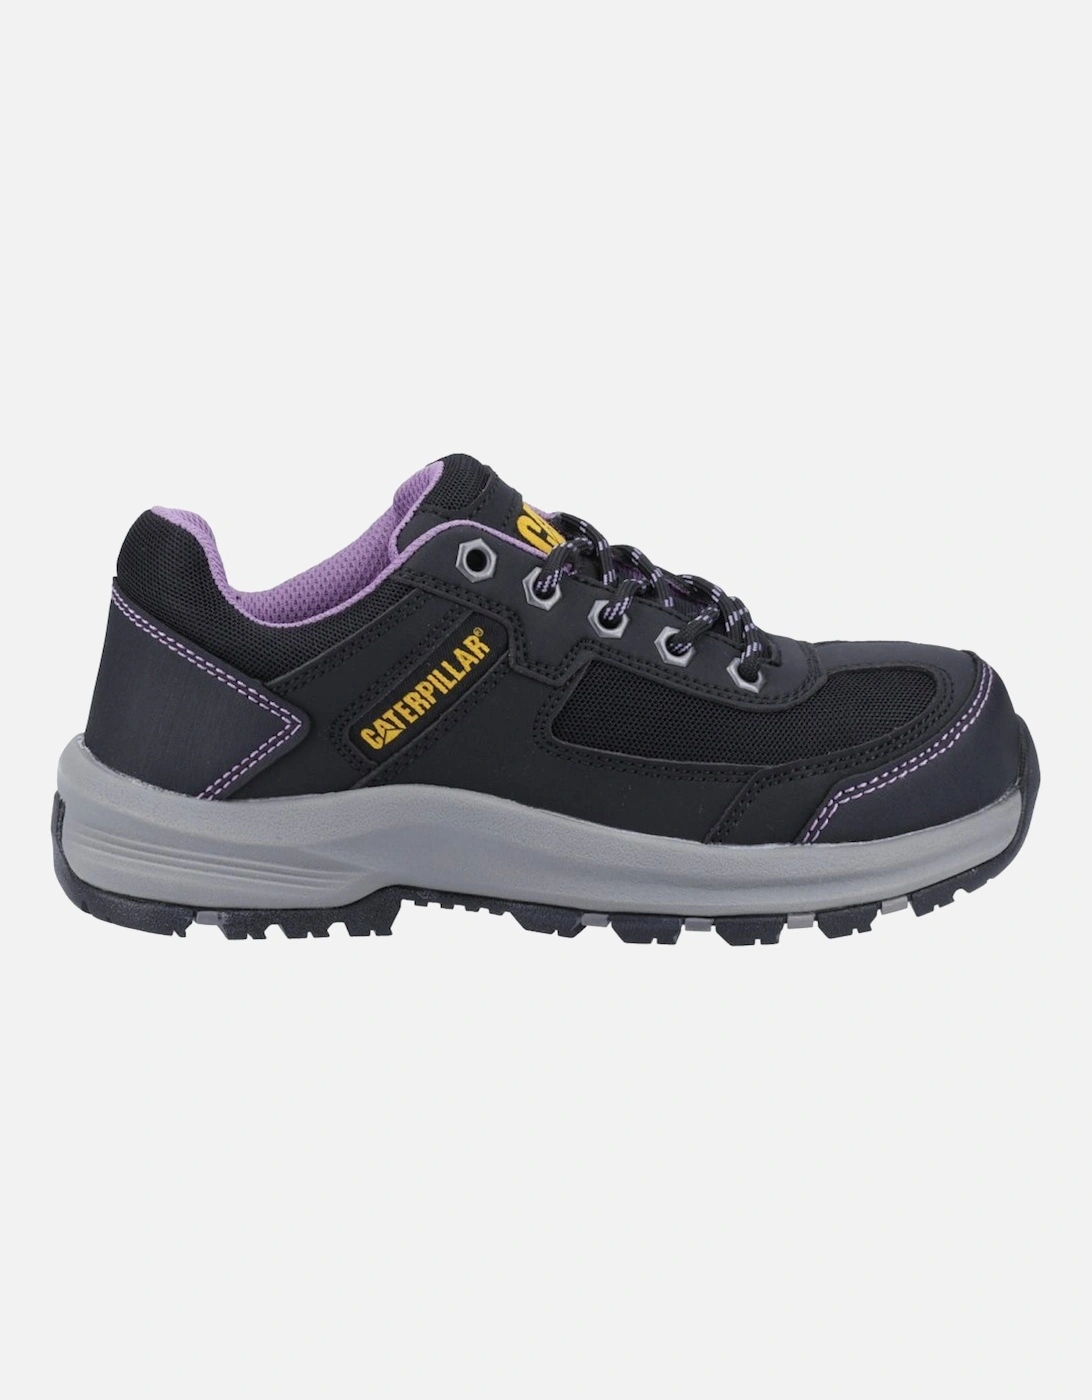 Elmore Womens Safety Work Shoes